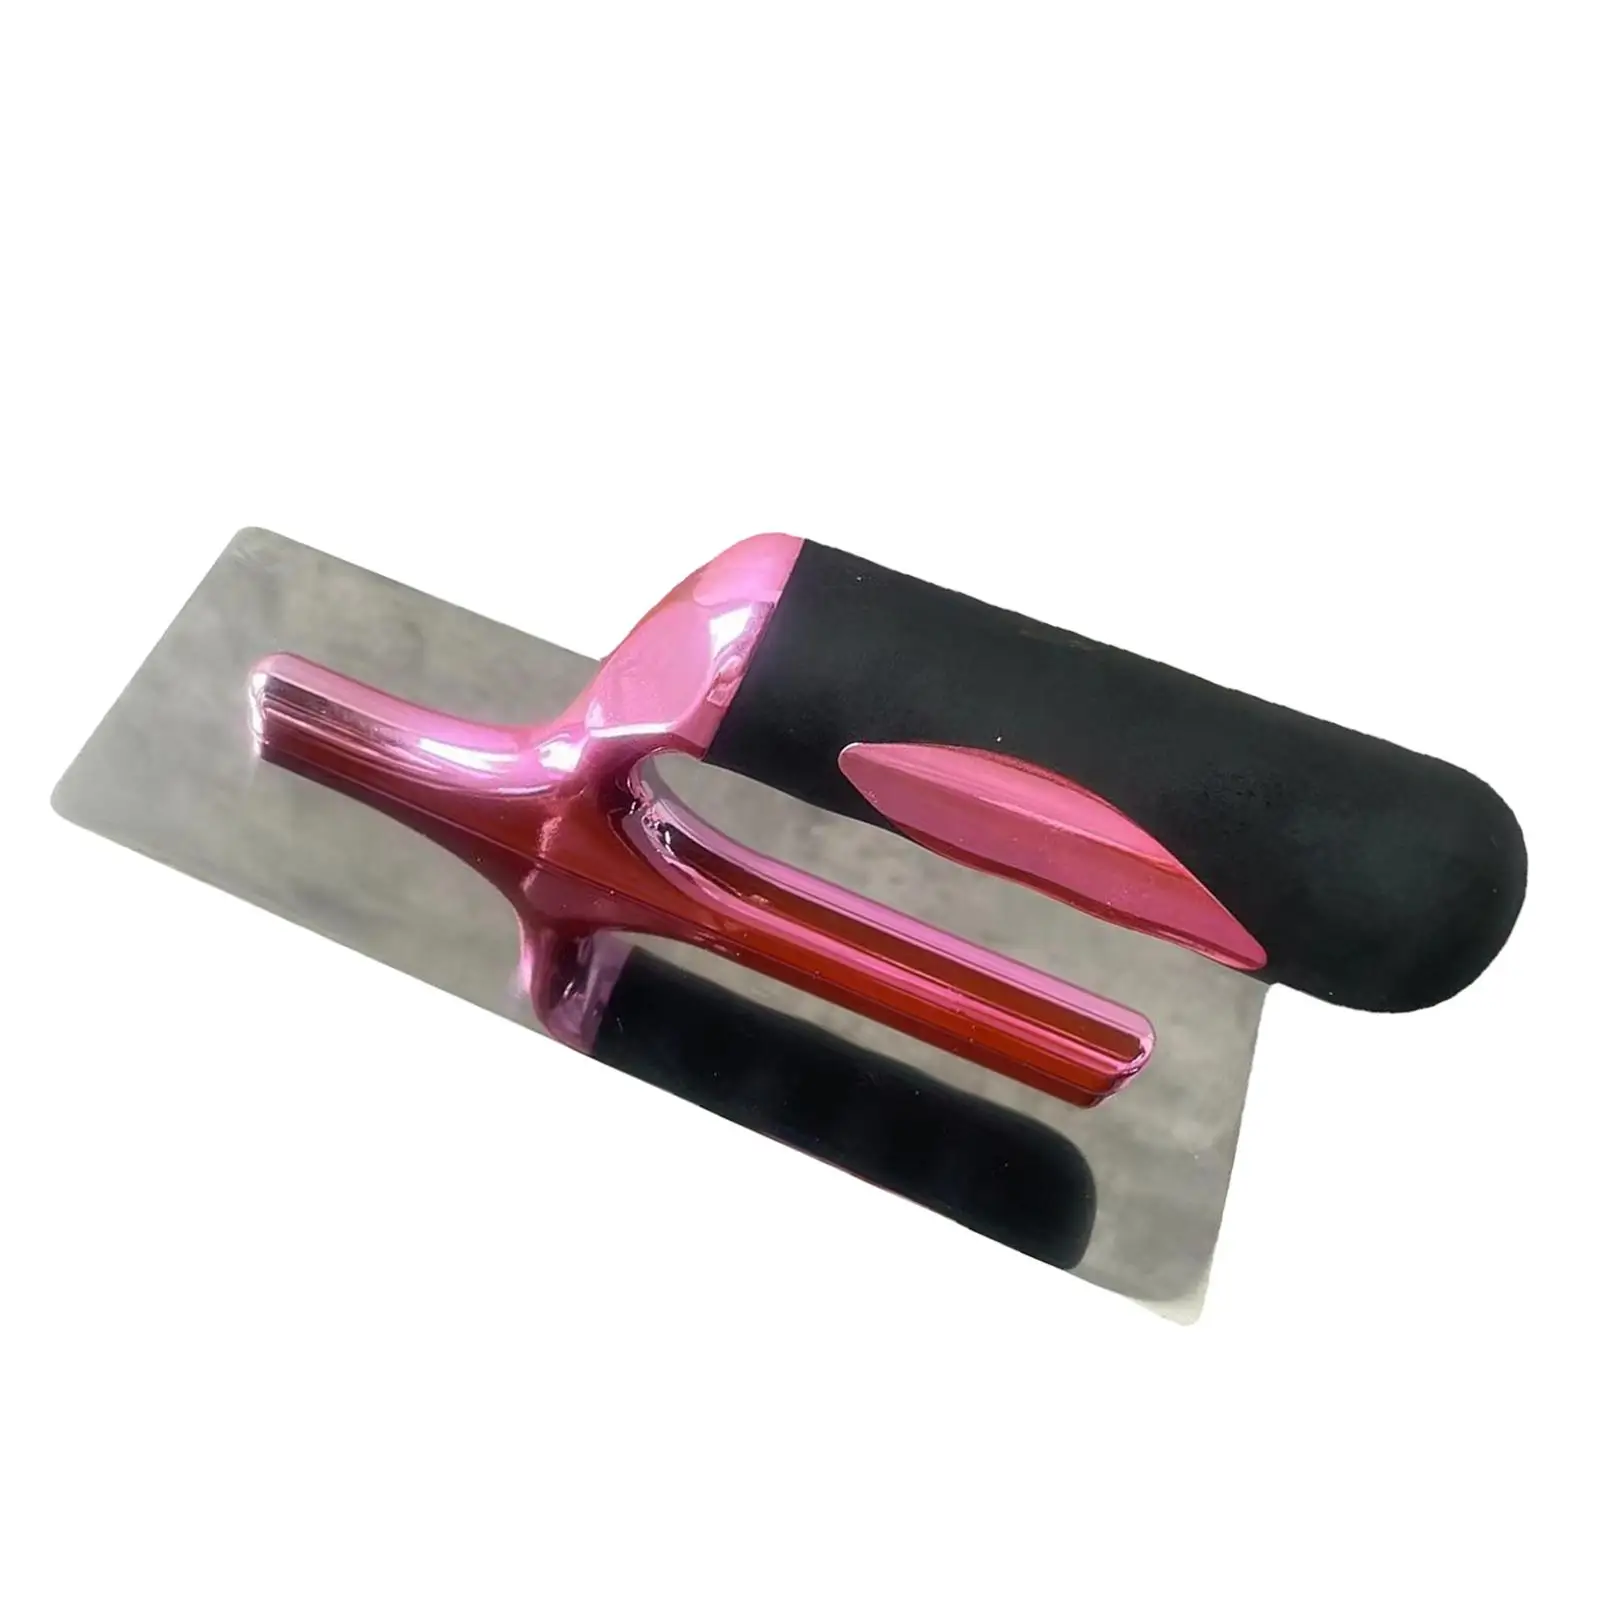 Drywall Plastering Trowel Finishing Trowel for Concrete Home Decorating